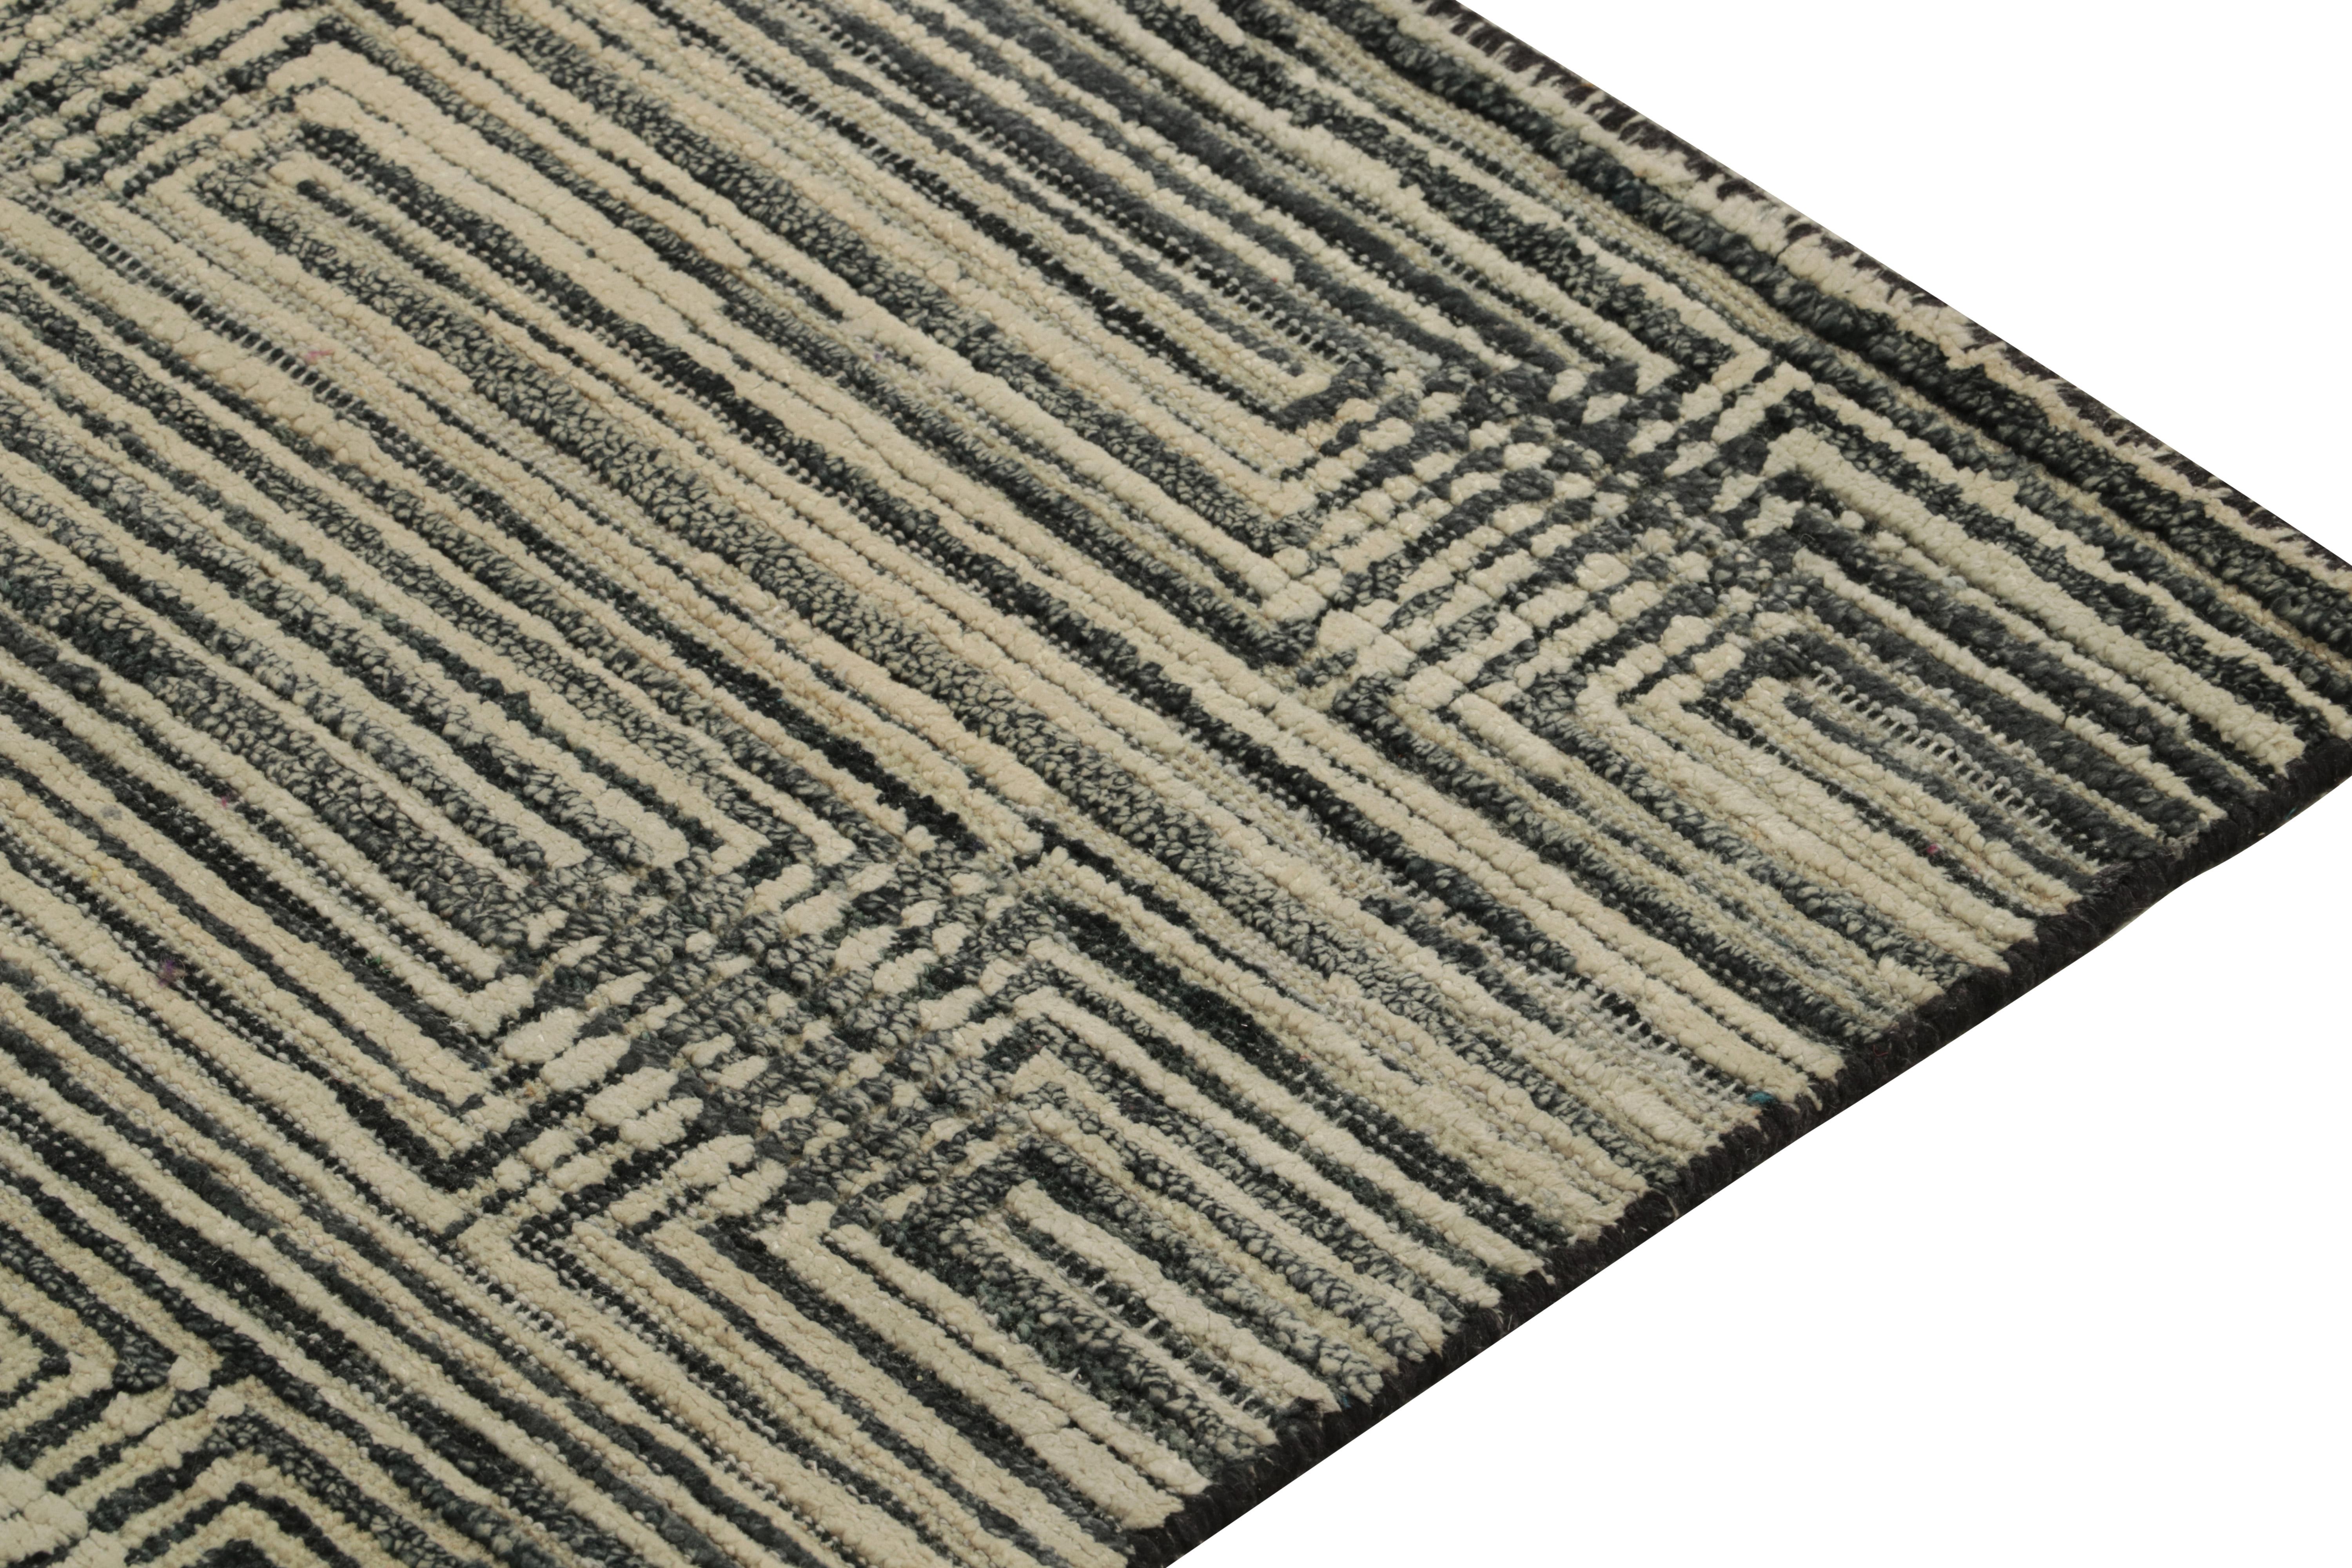 Hand-Knotted Rug & Kilim’s Contemporary runner in Black, White & Beige Geometric Pattern For Sale